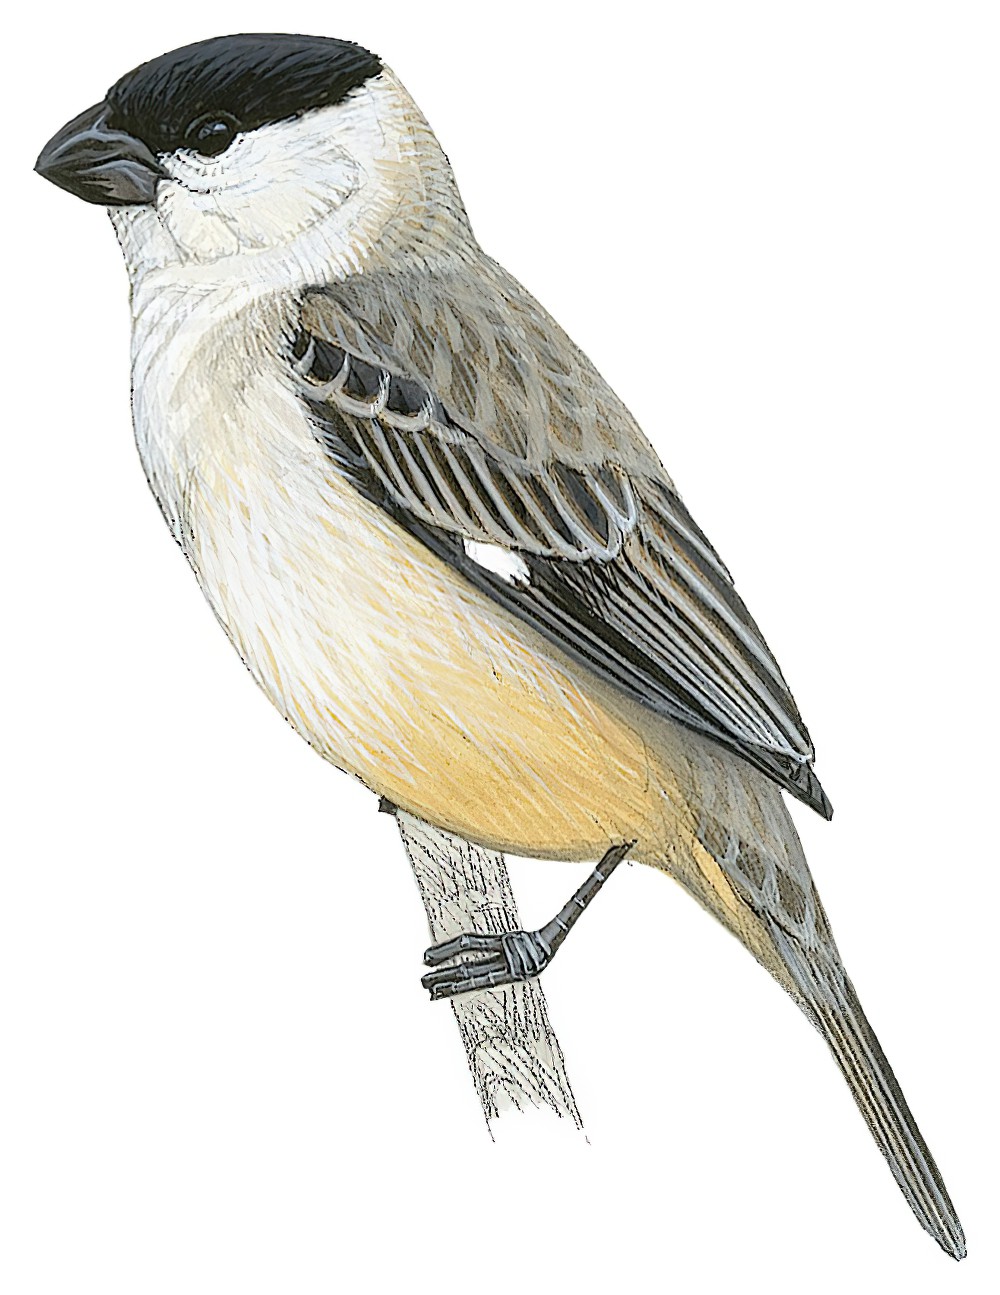 Pearly-bellied Seedeater / Sporophila pileata